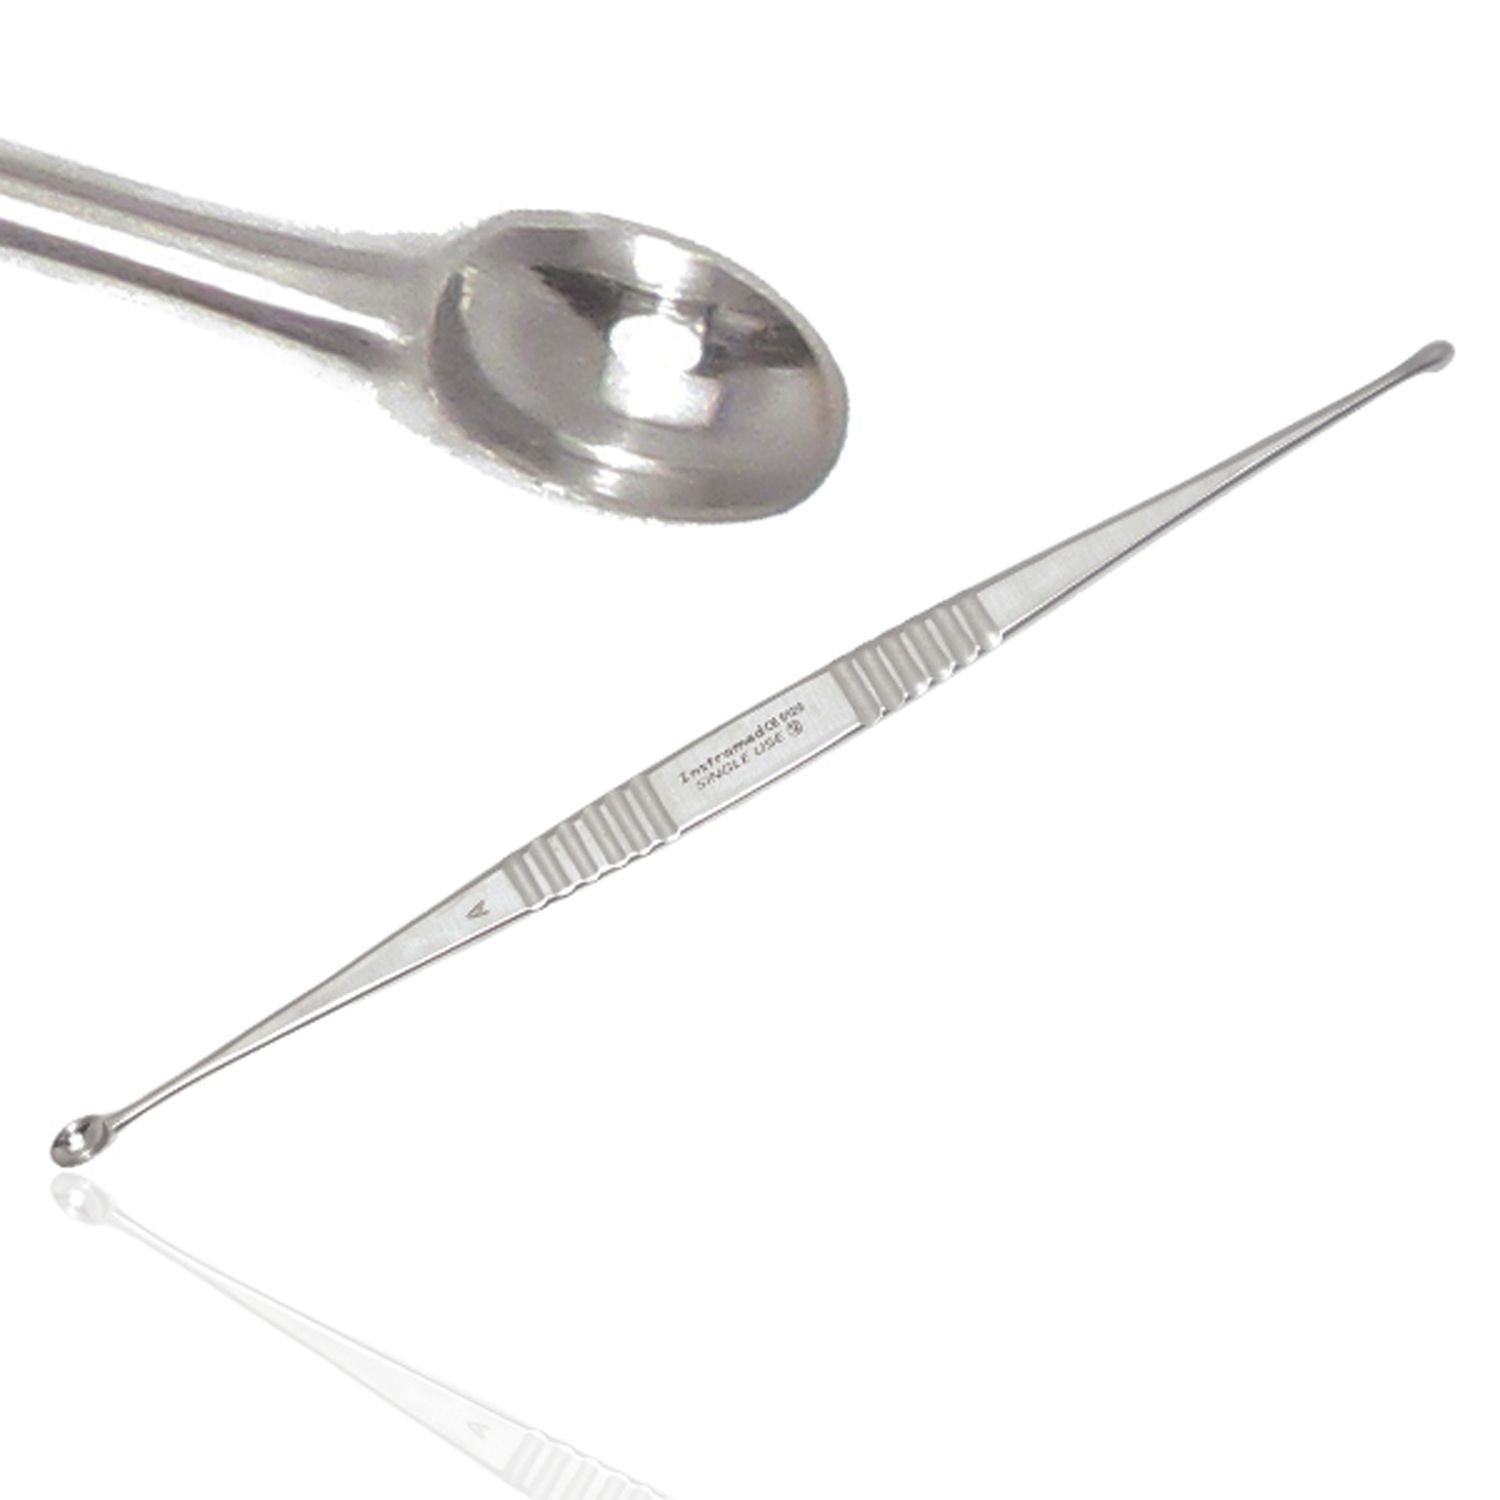 Instramed Volkmann Double Curette Ended Spoon | 22cm | Small